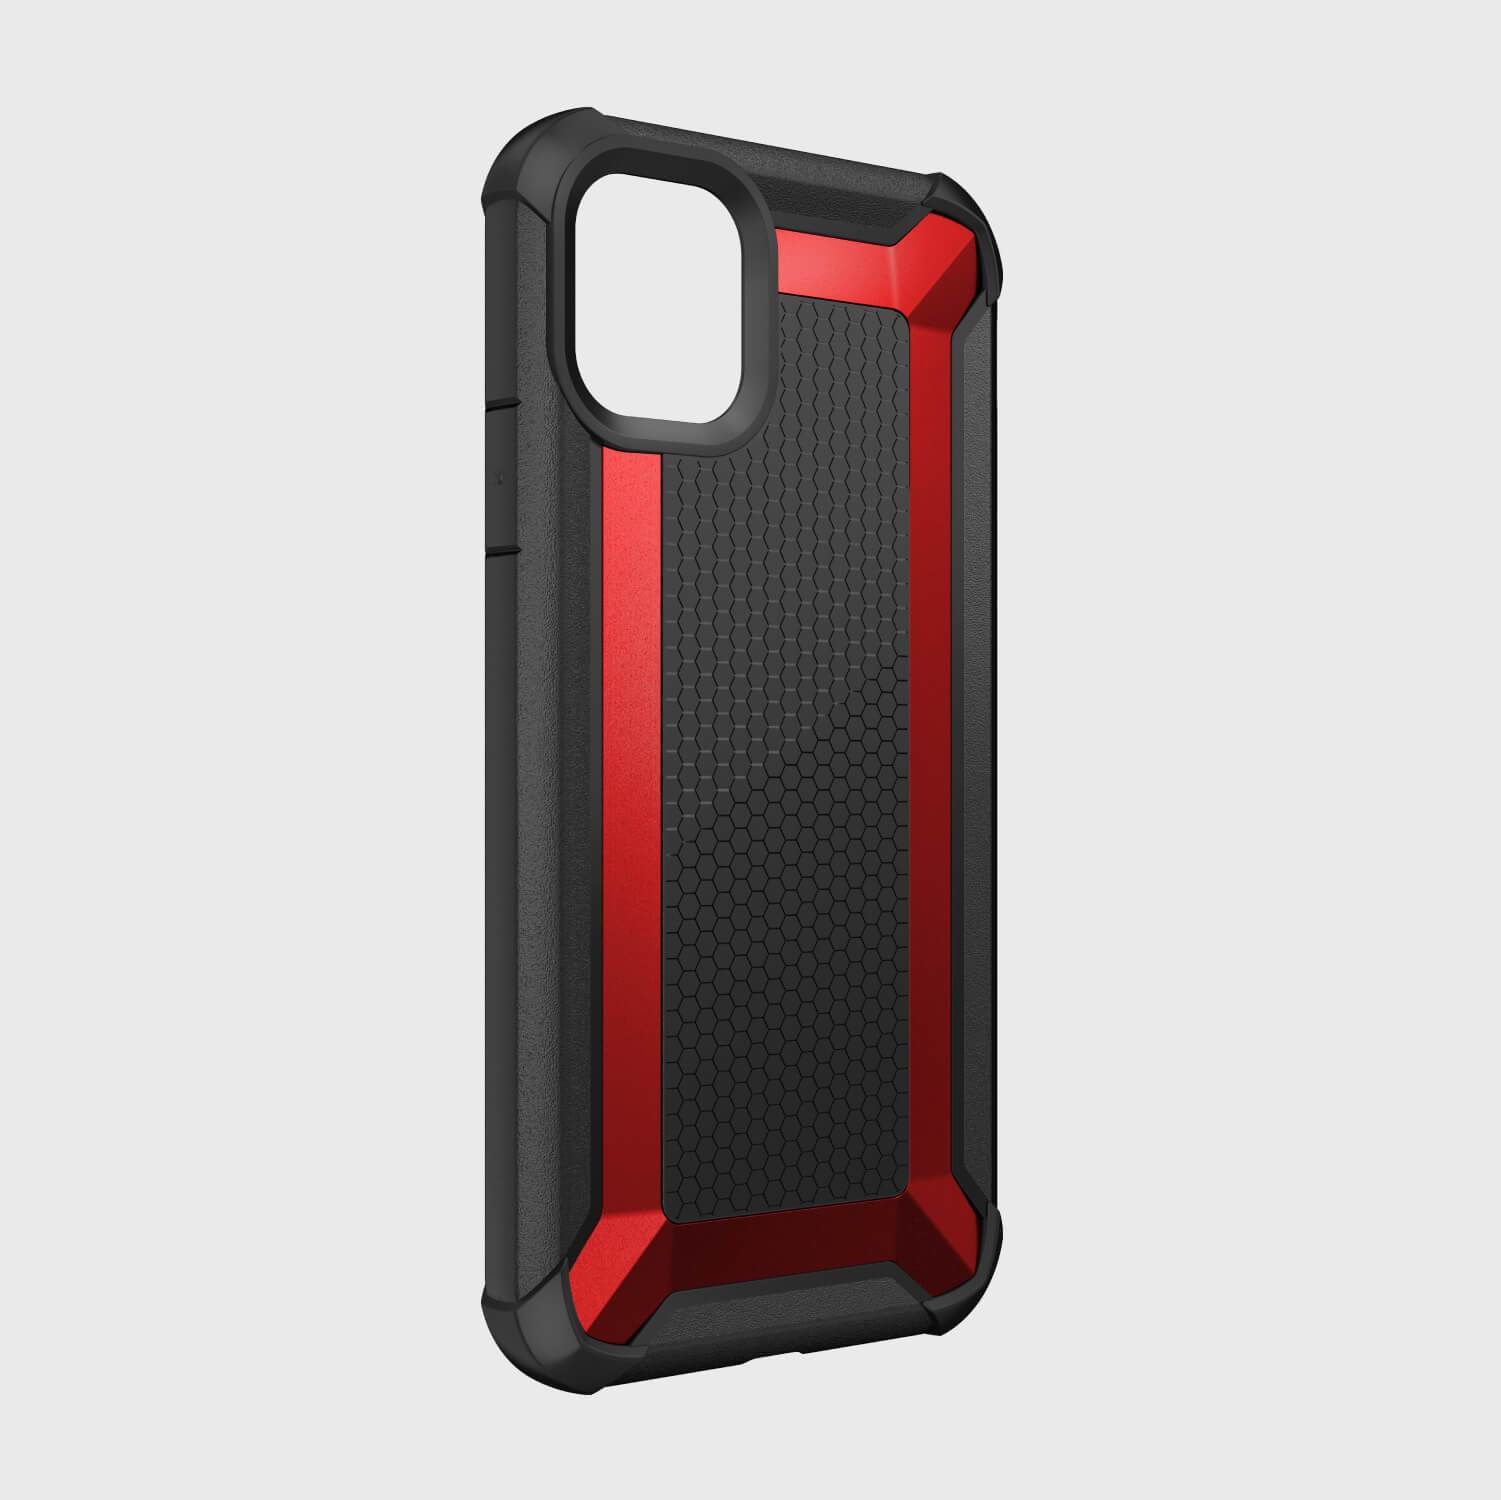 The black and red Raptic iPhone 11 Pro Case - TACTICAL is shock-absorbing and provides a protective shield for your phone.